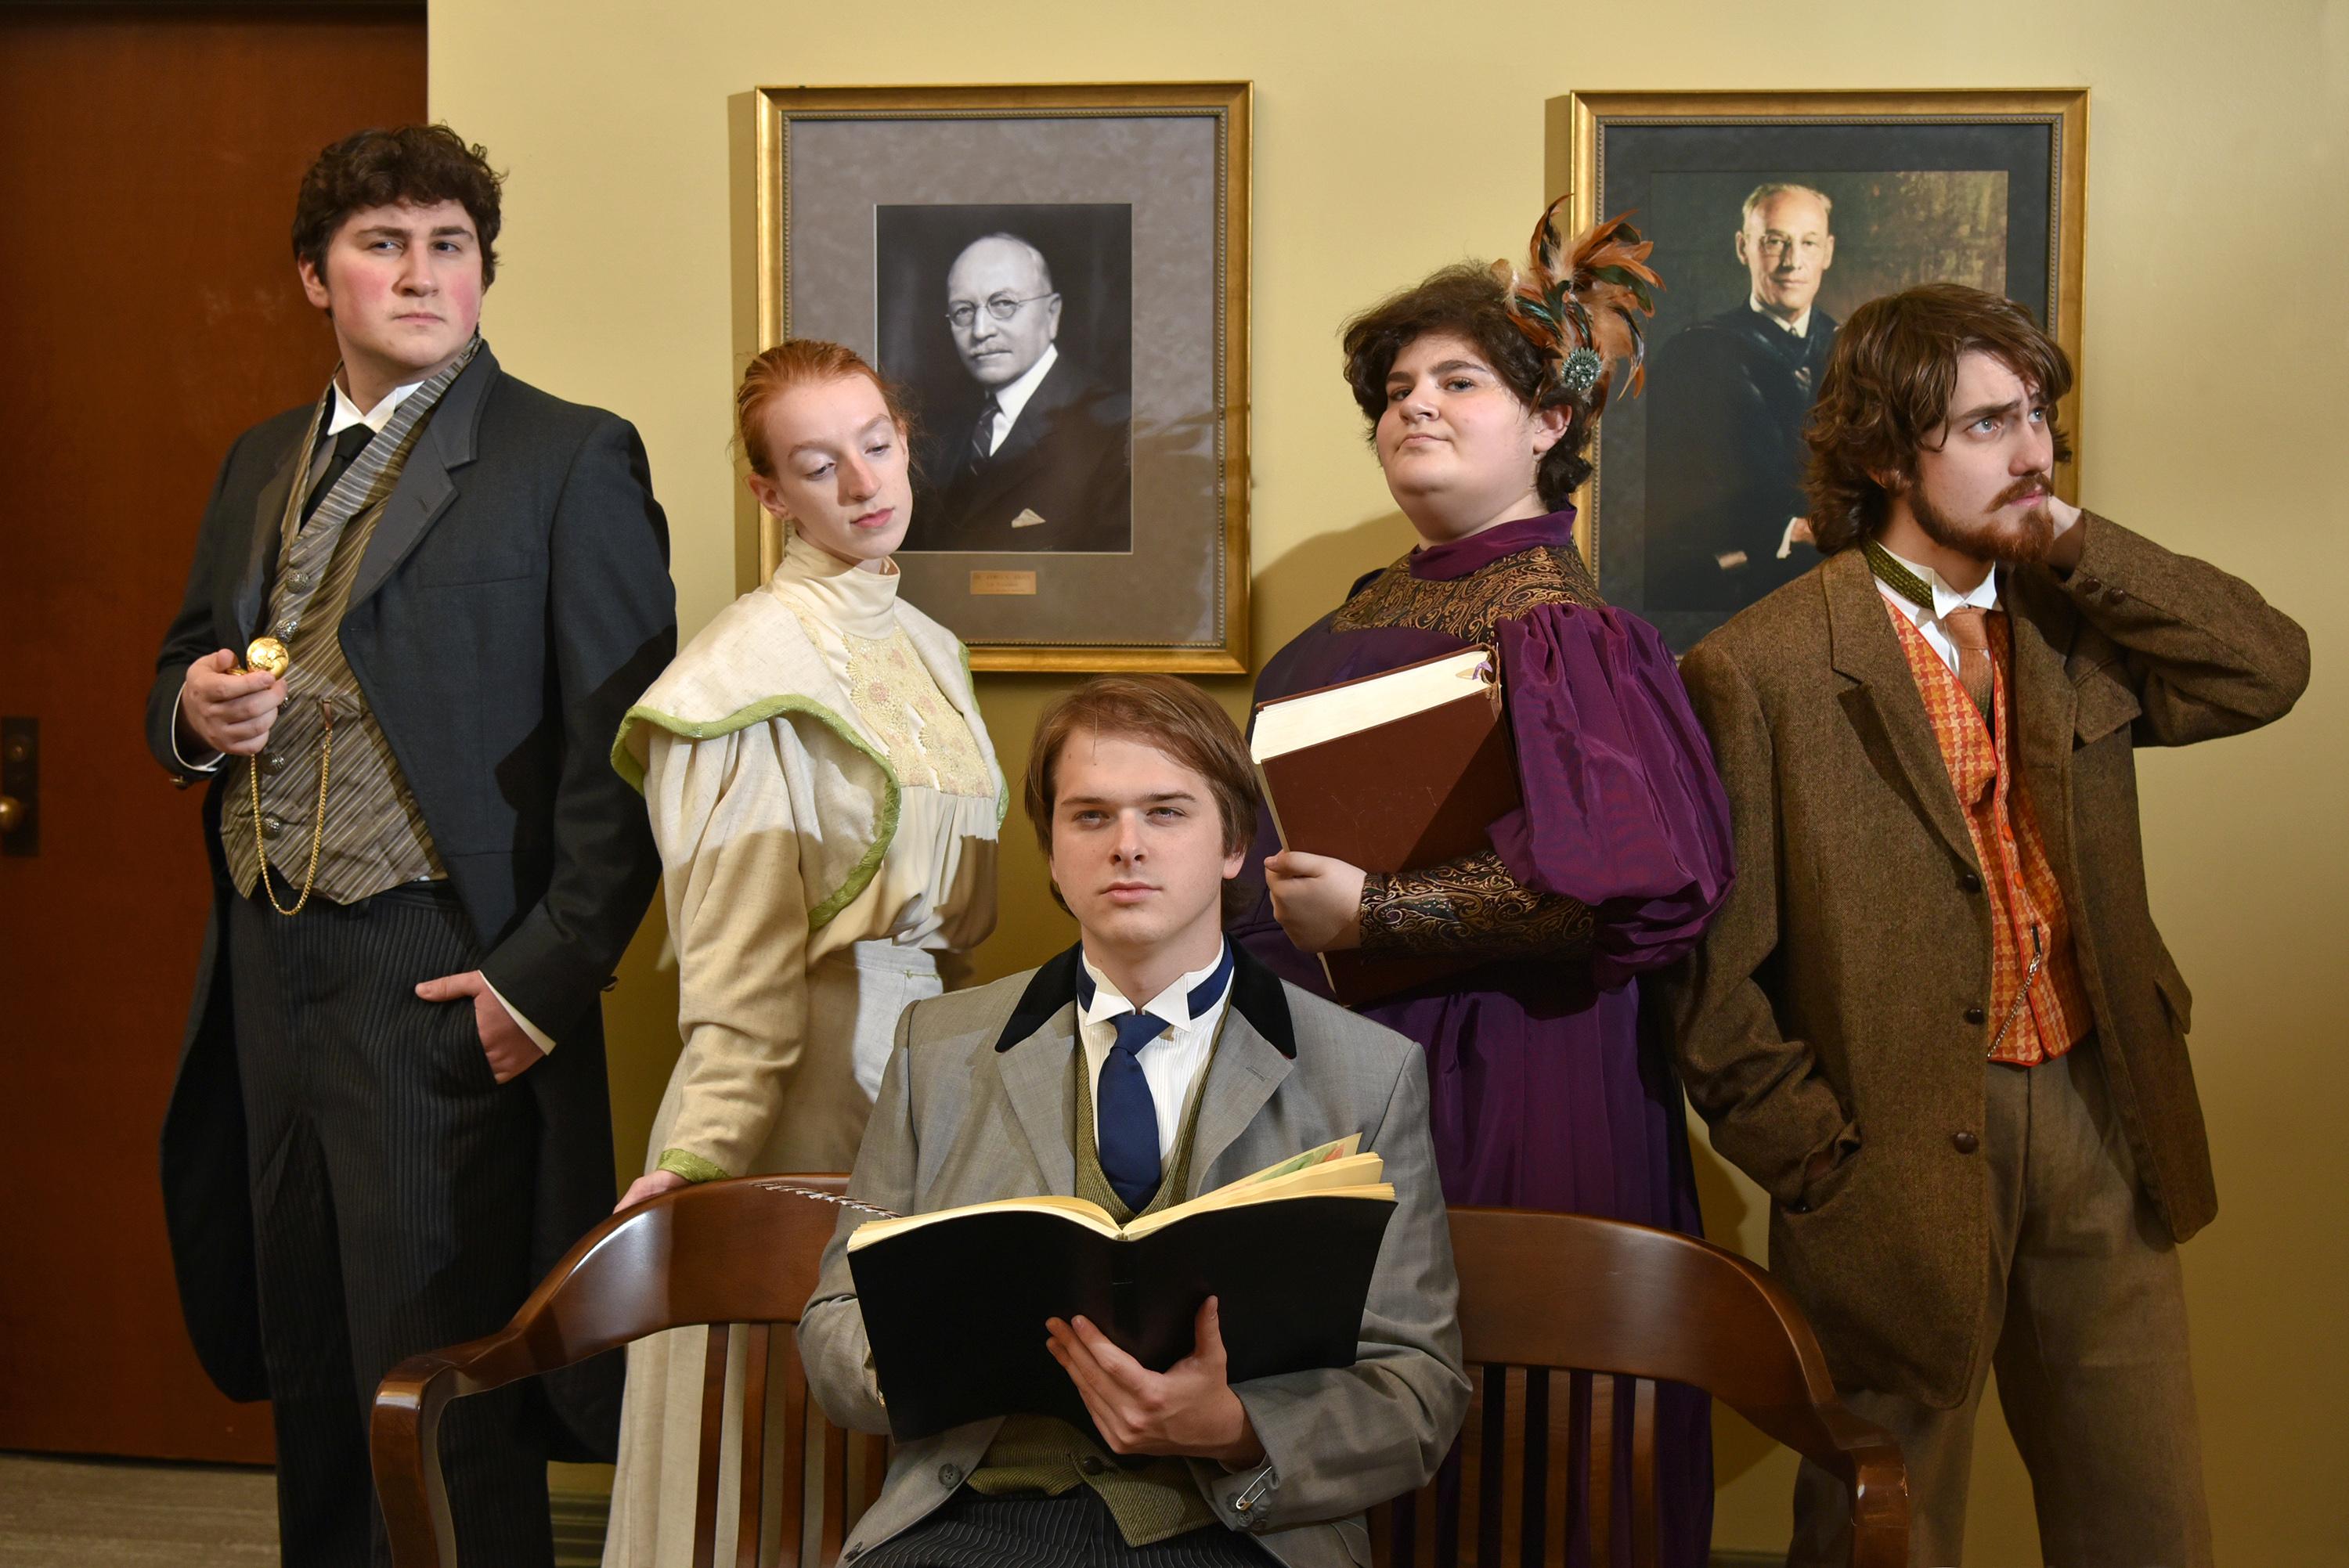 Five cast members of The Good Doctor in 19th century costumes